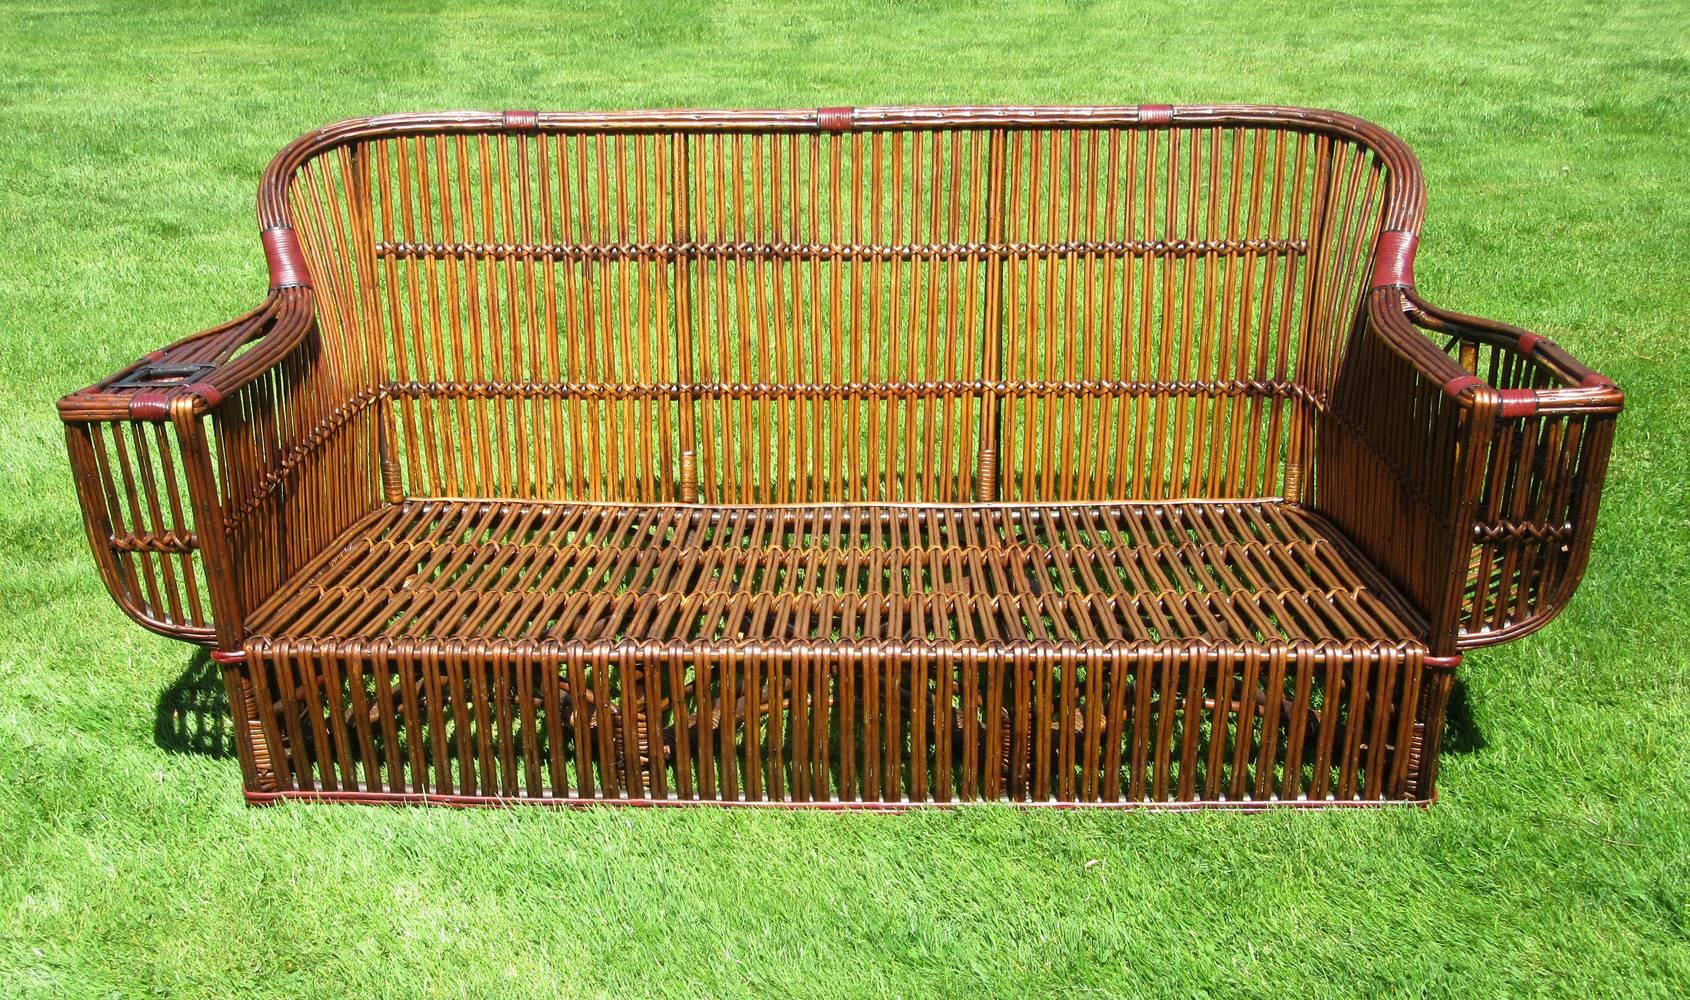 Large-scale stick wicker sofa in medium-toned natural stained finish with red and black painted trim. Deep seated with closely paired rattan strands overall. Large framed armrests having magazine rack and beverage holder.